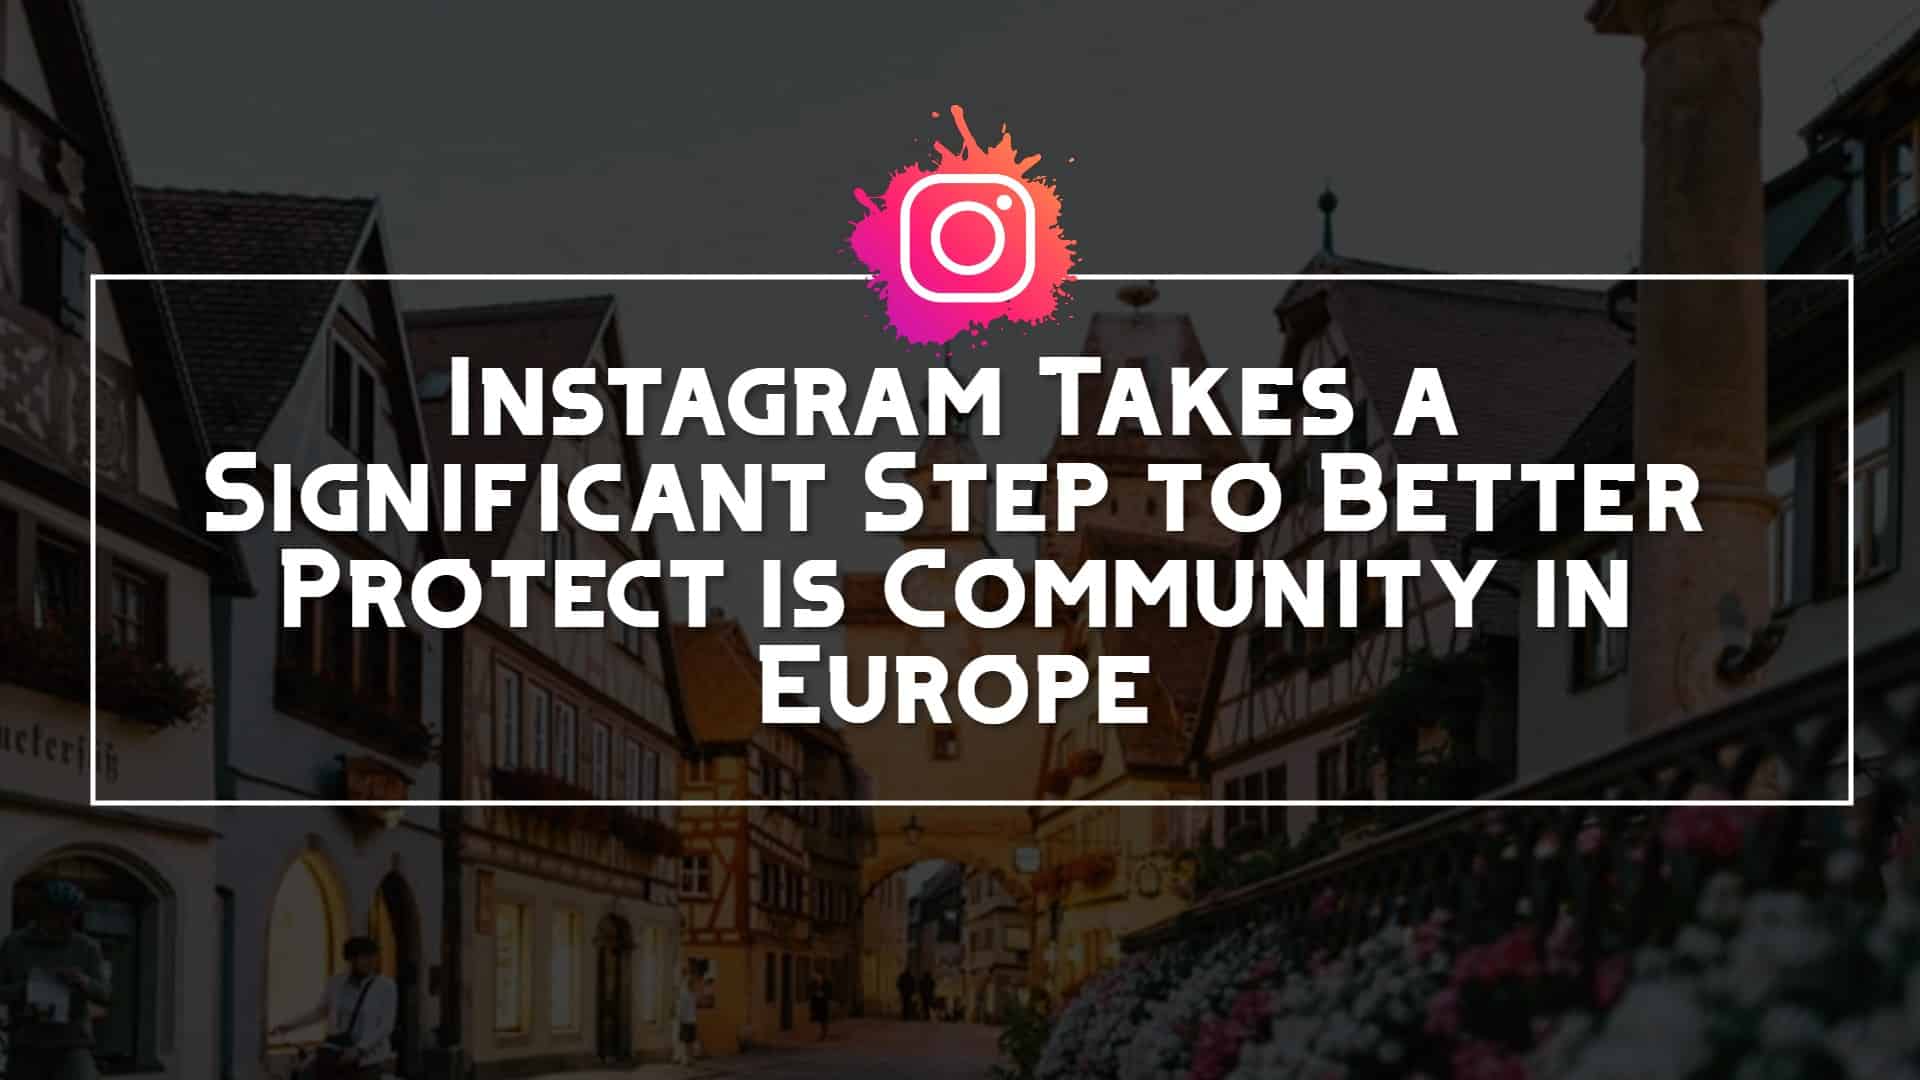 Instagram-Takes-a-Significant-Step-to-Better-Protect-is-Community-in-Europe.jpg